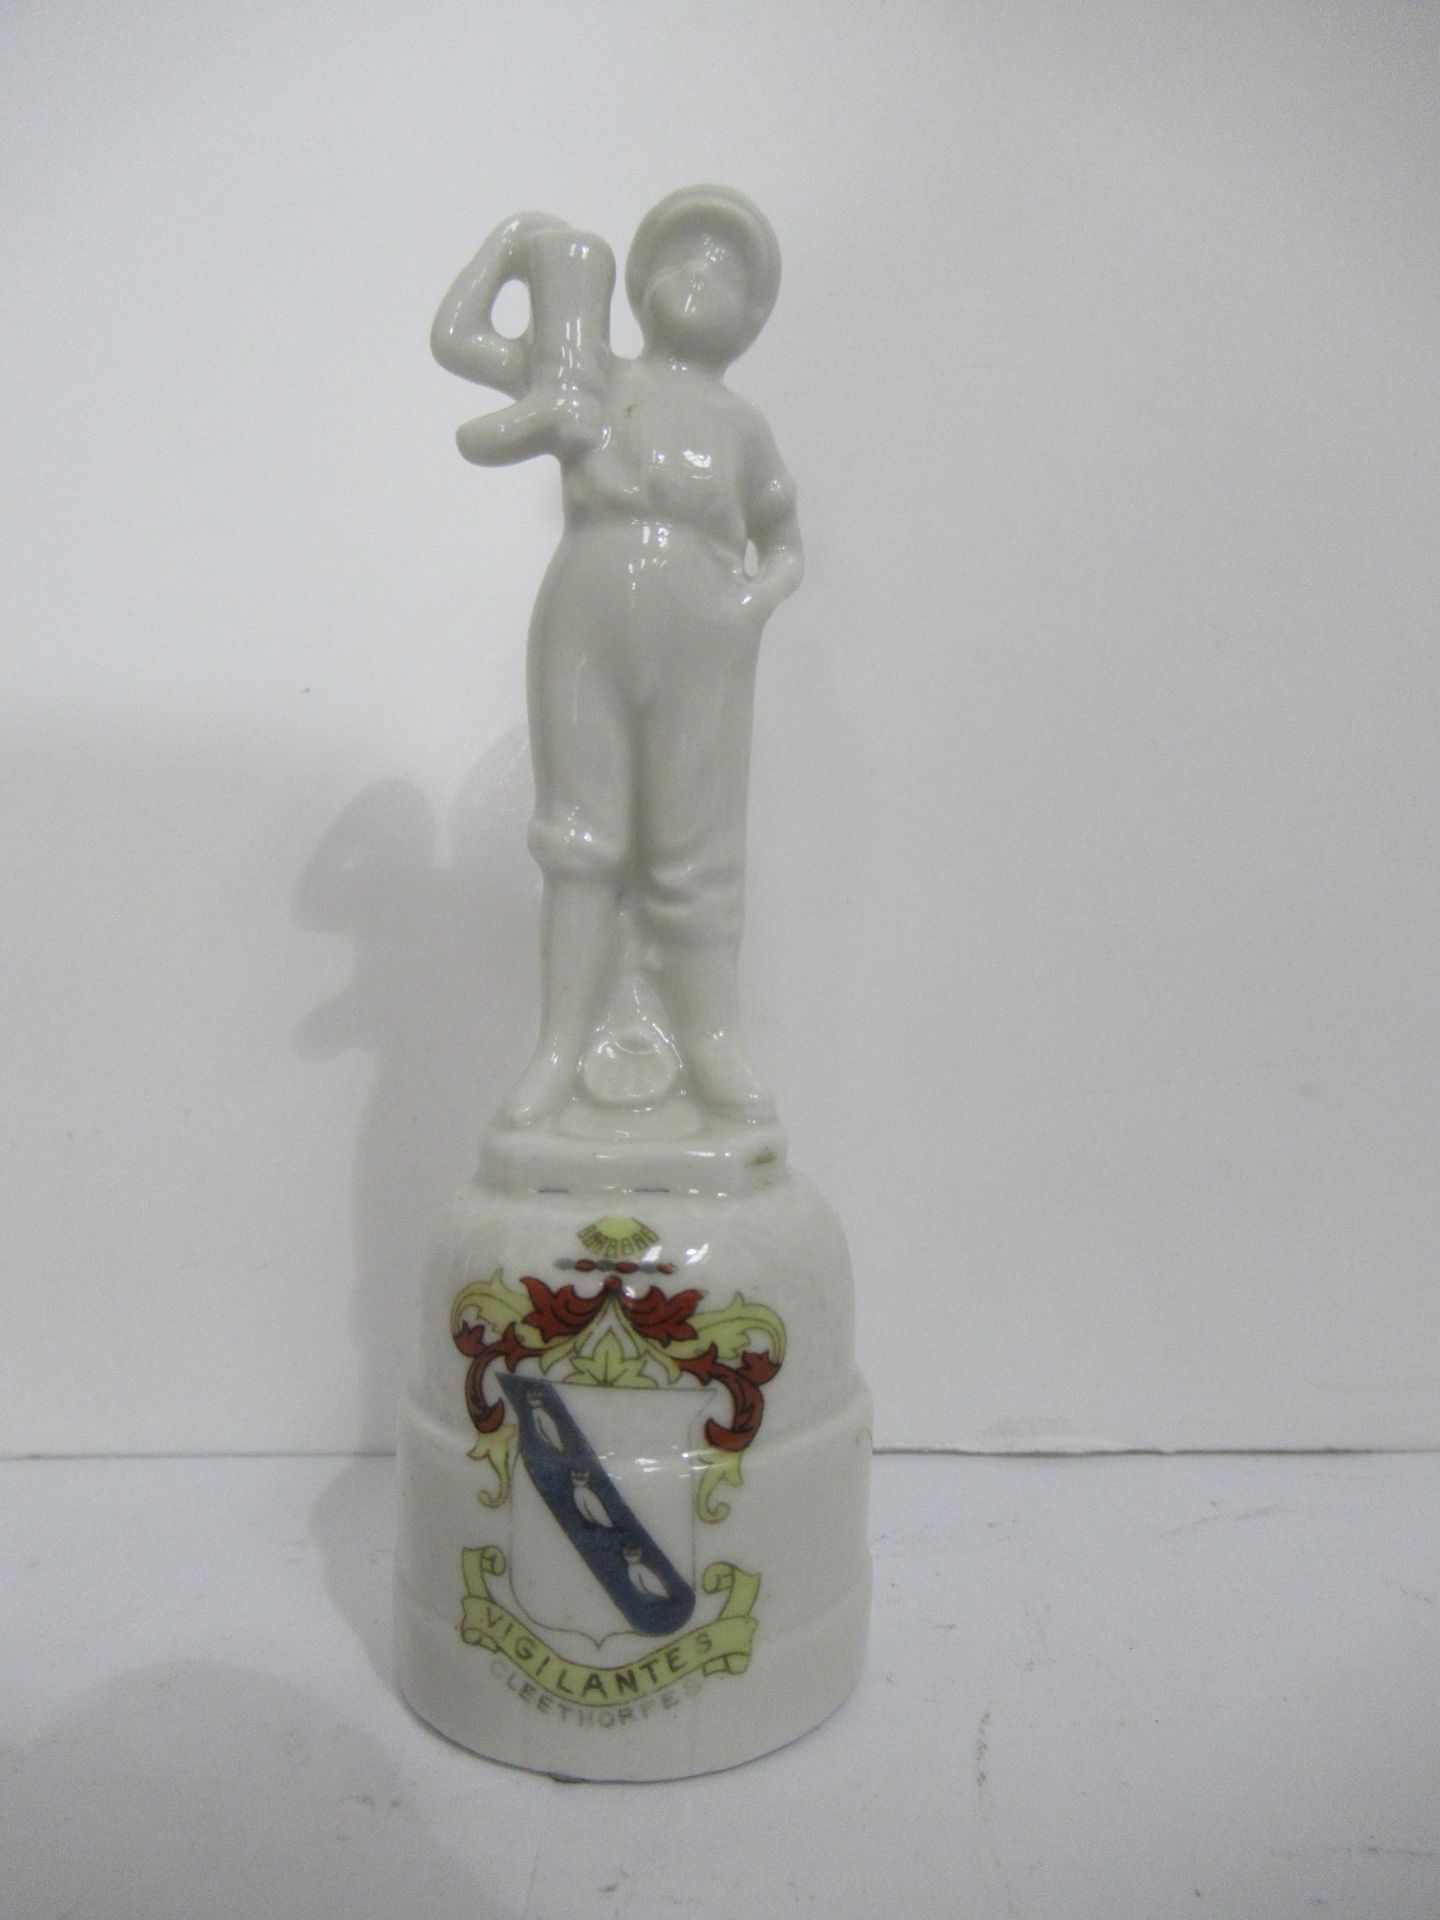 2x Crested China figures of the Leaking Boot' both with Cleethorpes coat of arms - Image 8 of 13